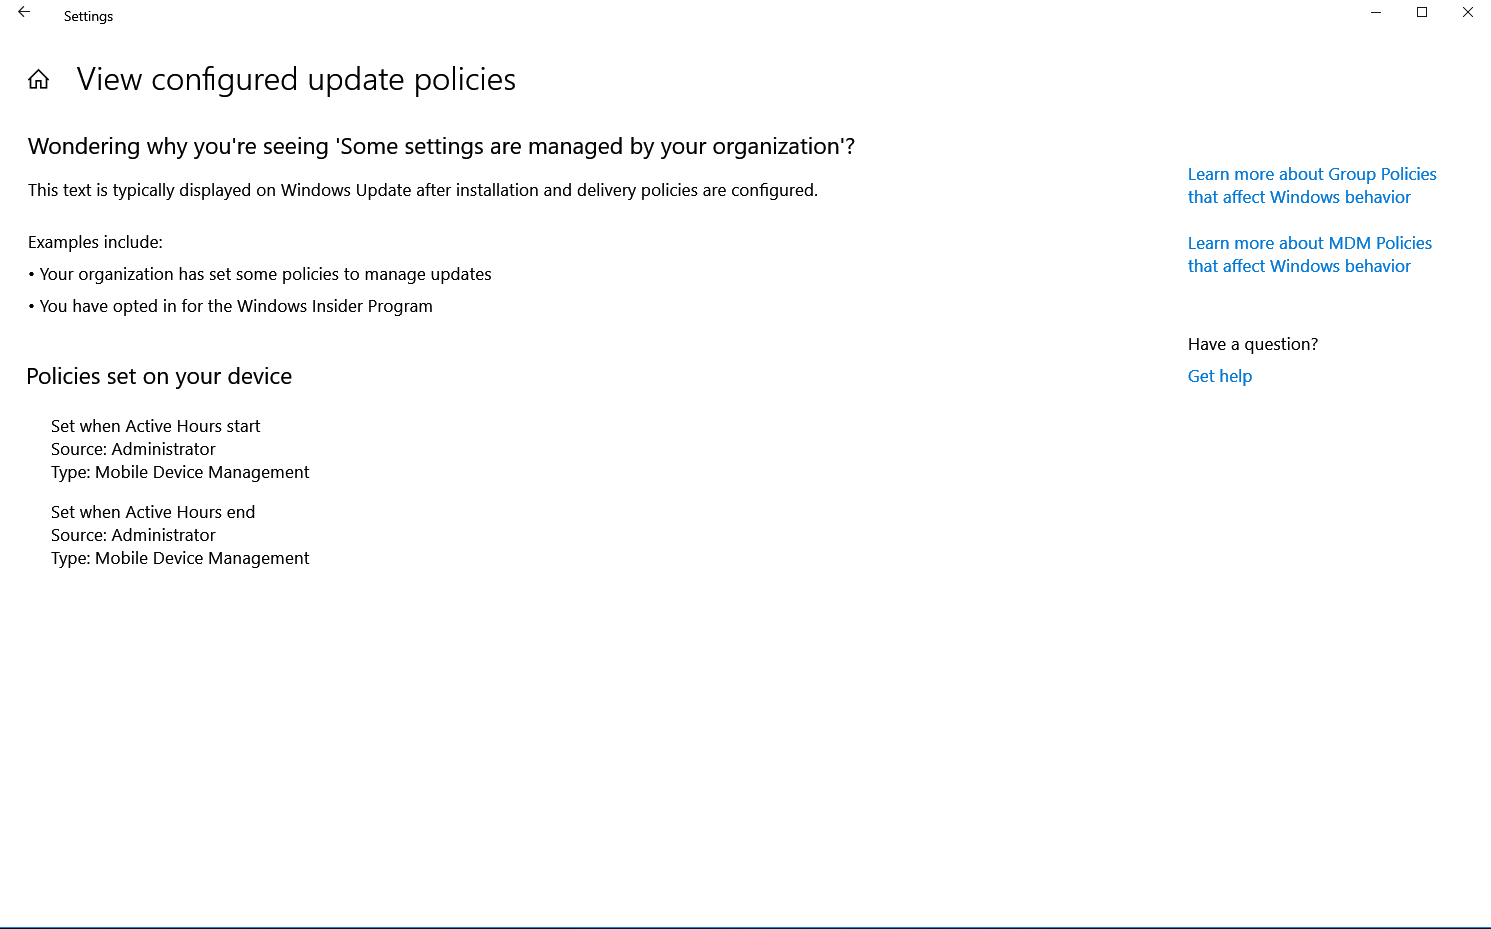 "Some settings are managed by your organization" in windows update 875fafac-6adf-430e-b5a3-aa70a44121e9?upload=true.png